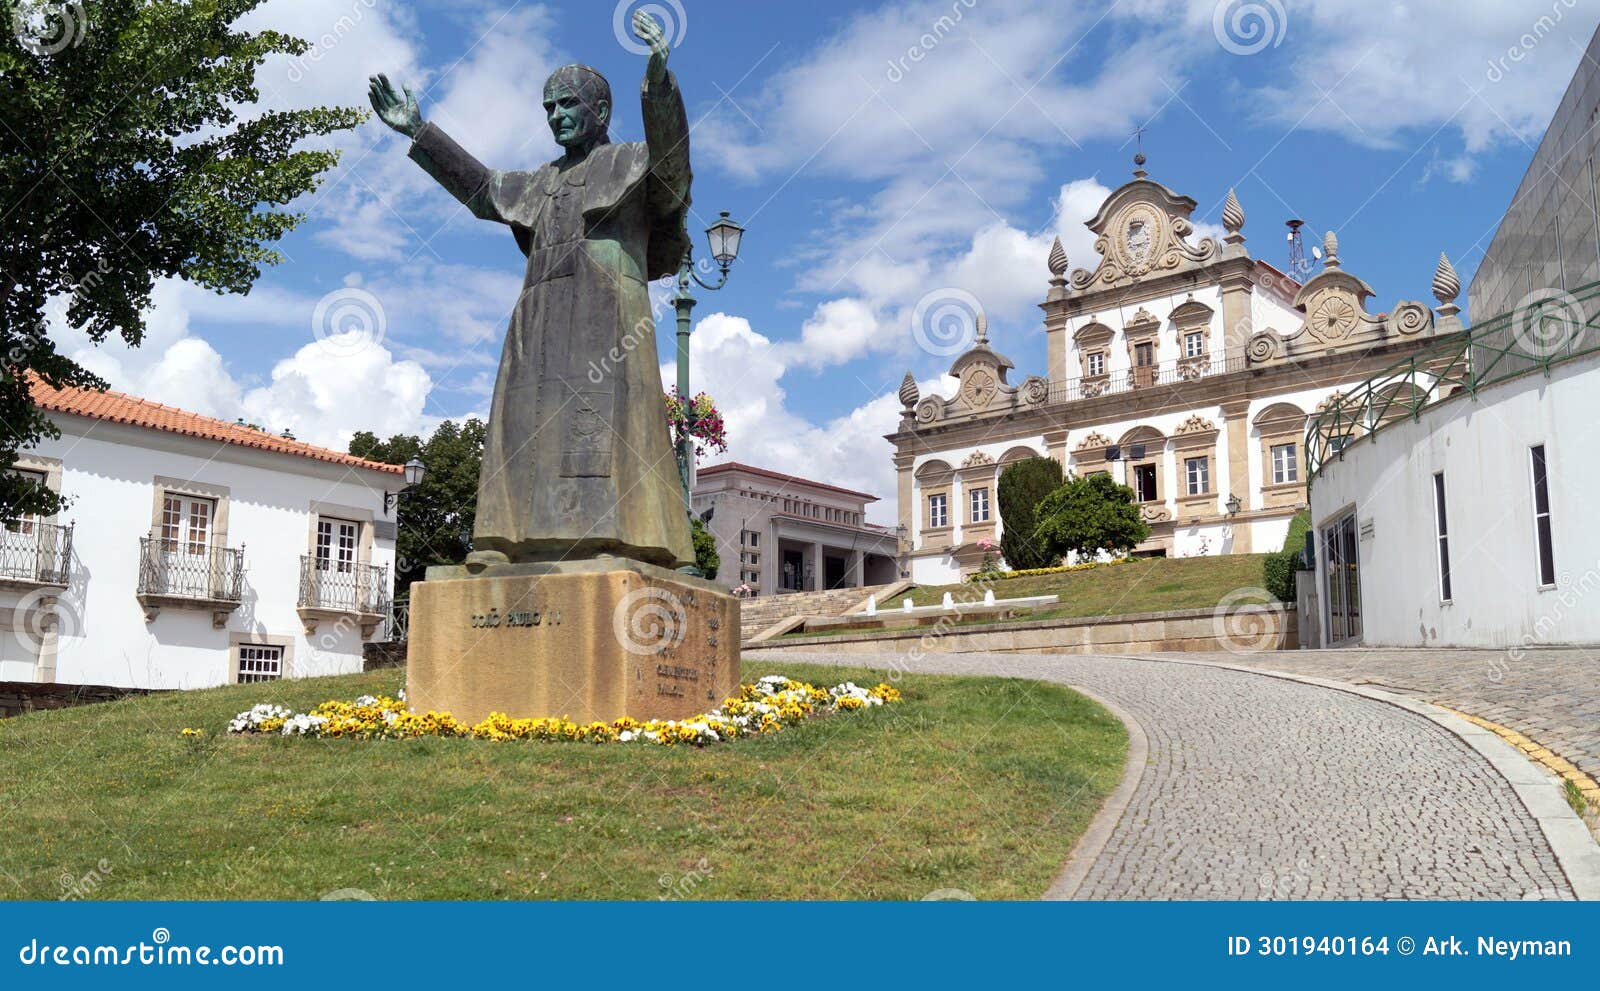 monument to john paul ii, paco dos tavoras in the background, mirandela, portugal